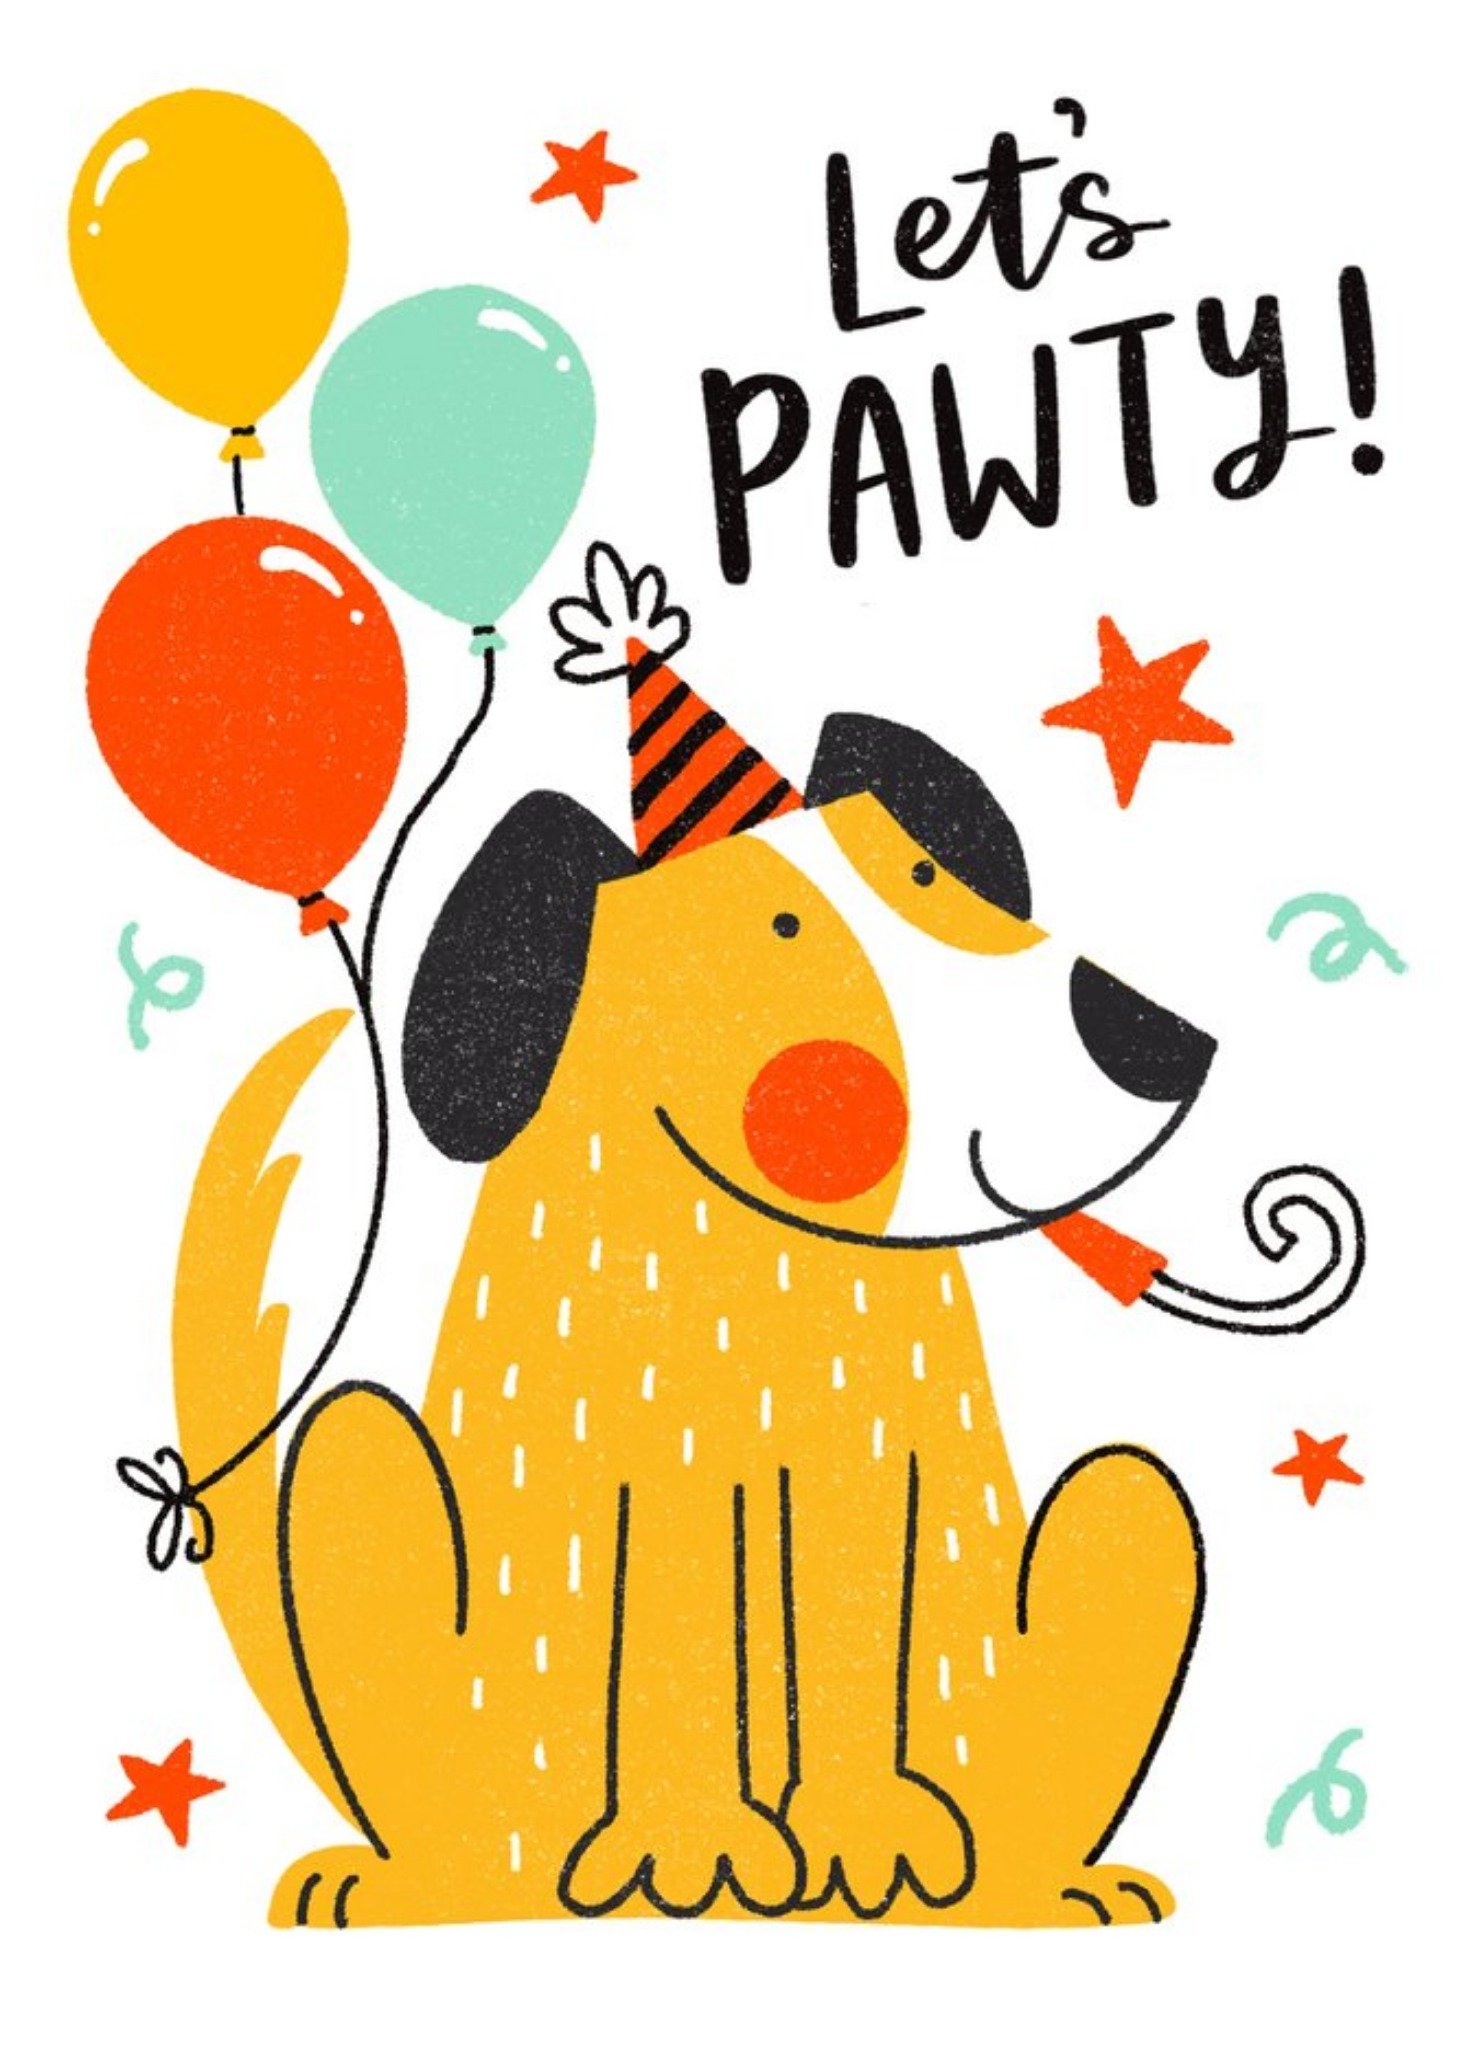 Moonpig Bright Illustration Of A Party Dog. Let's Pawty Card Ecard